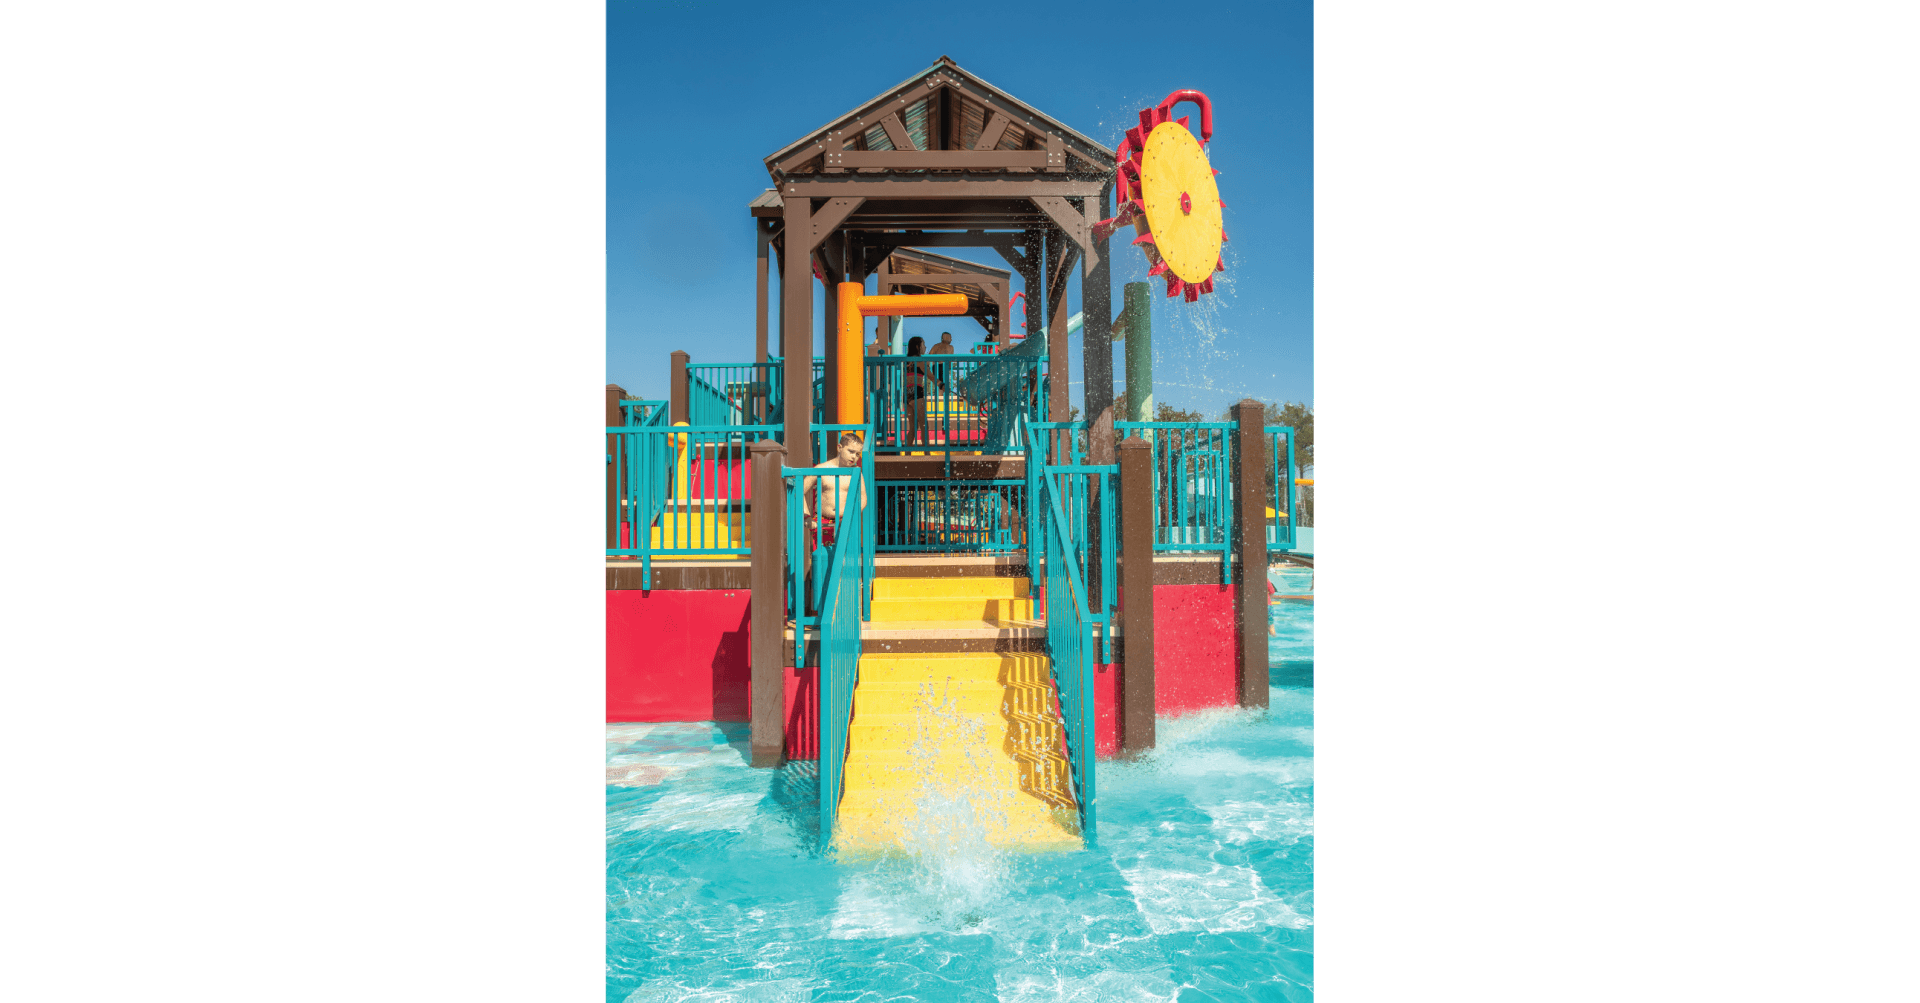 The Oh Chute water wheel spins, attached to one of the decks at the water play structure at the Jellystone in Tyler Texas, spraying water in a circular pattern onto the pool floor.